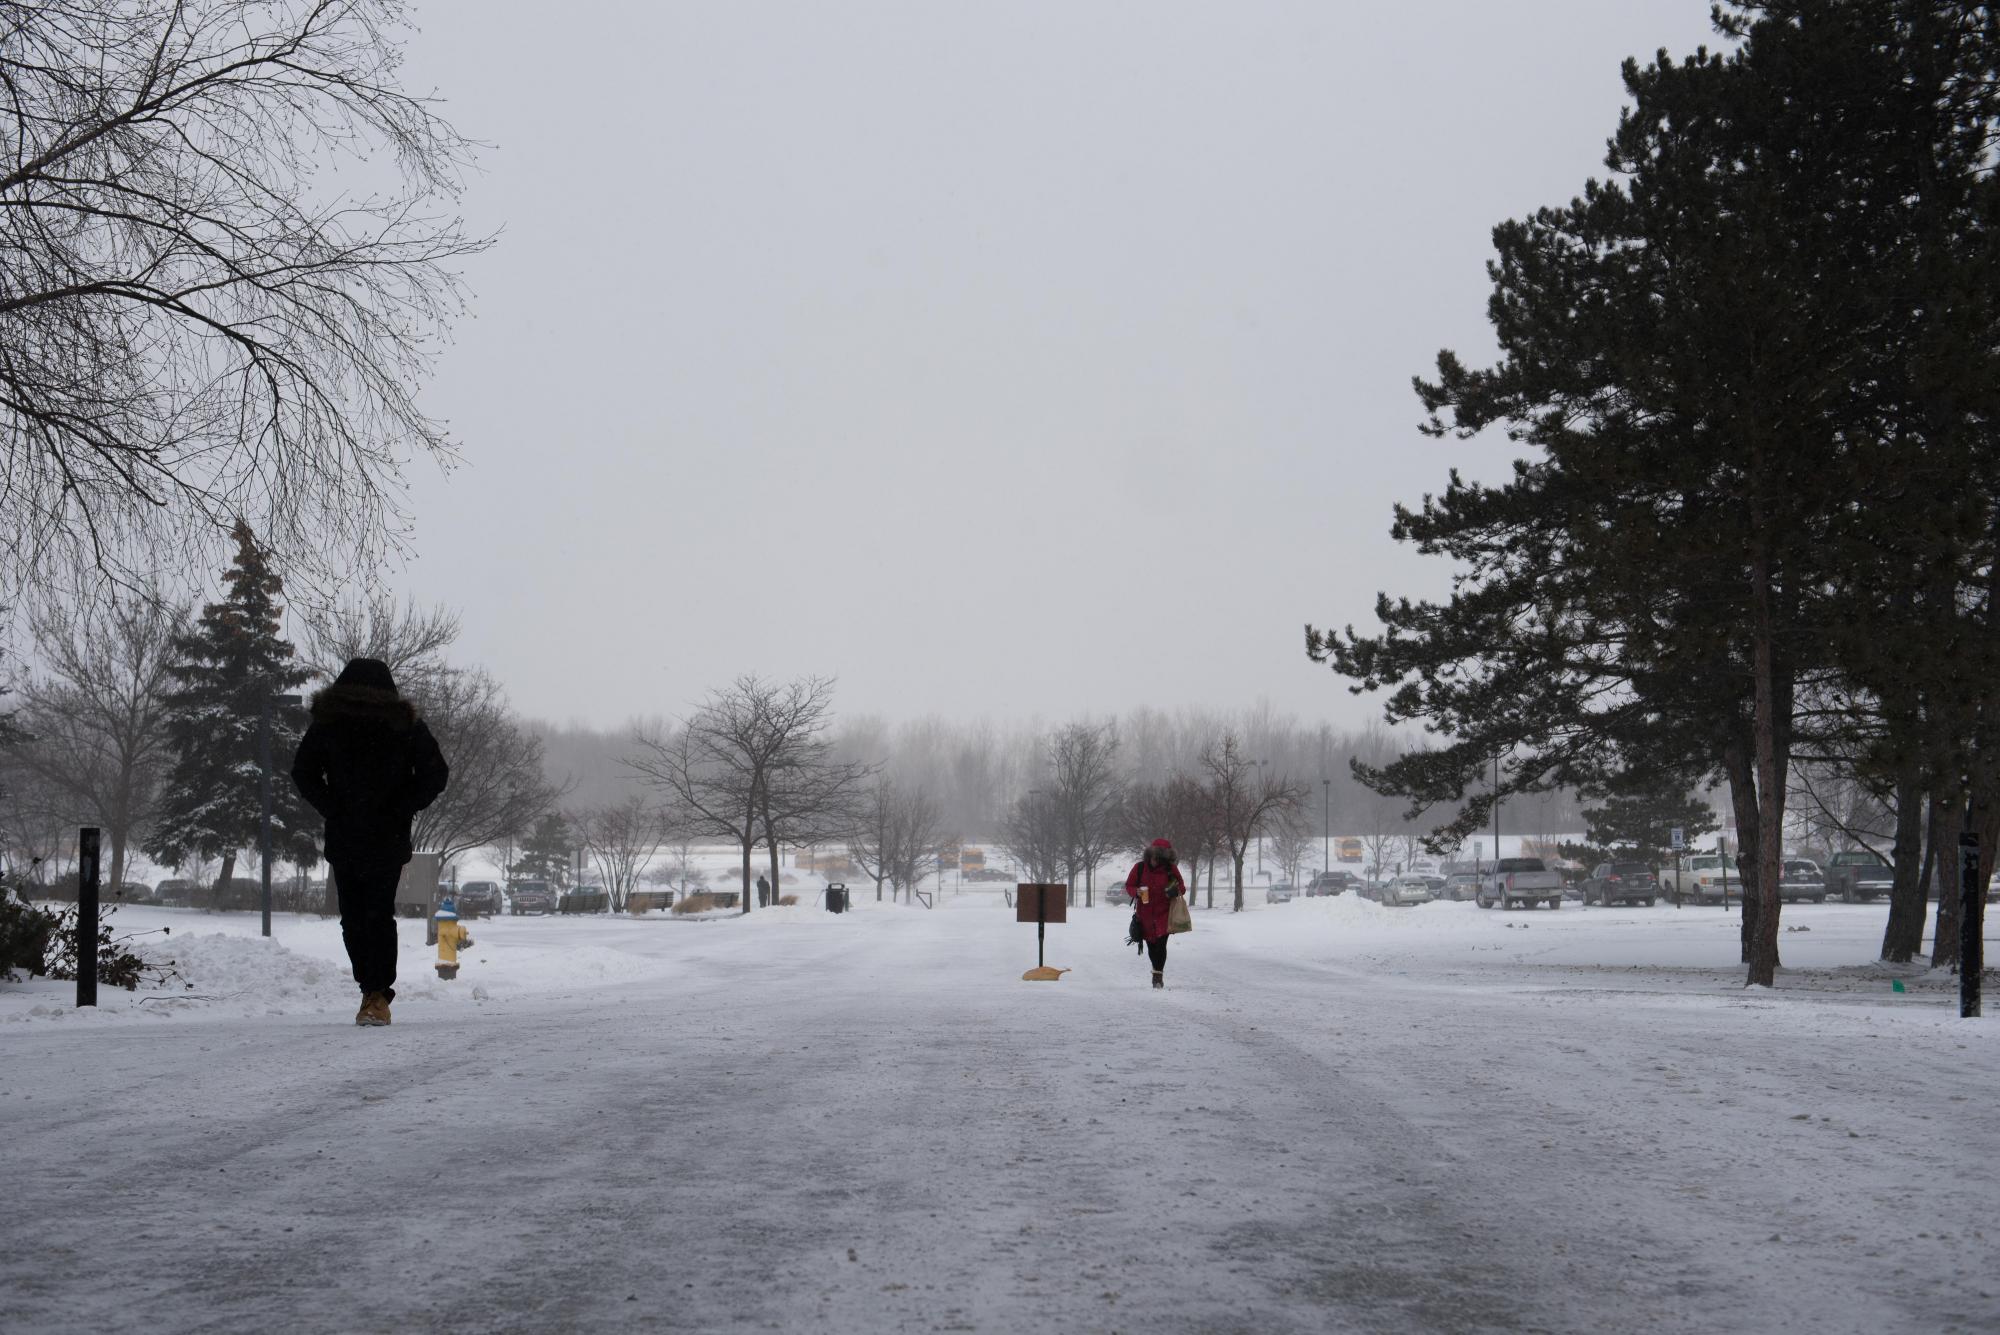 Pedestrians walk up the sidewalk on the north side of RIT's campus in front of Booth and Gannett halls on Feb. 13, 2016. Photograph by Kristen McNicholas.